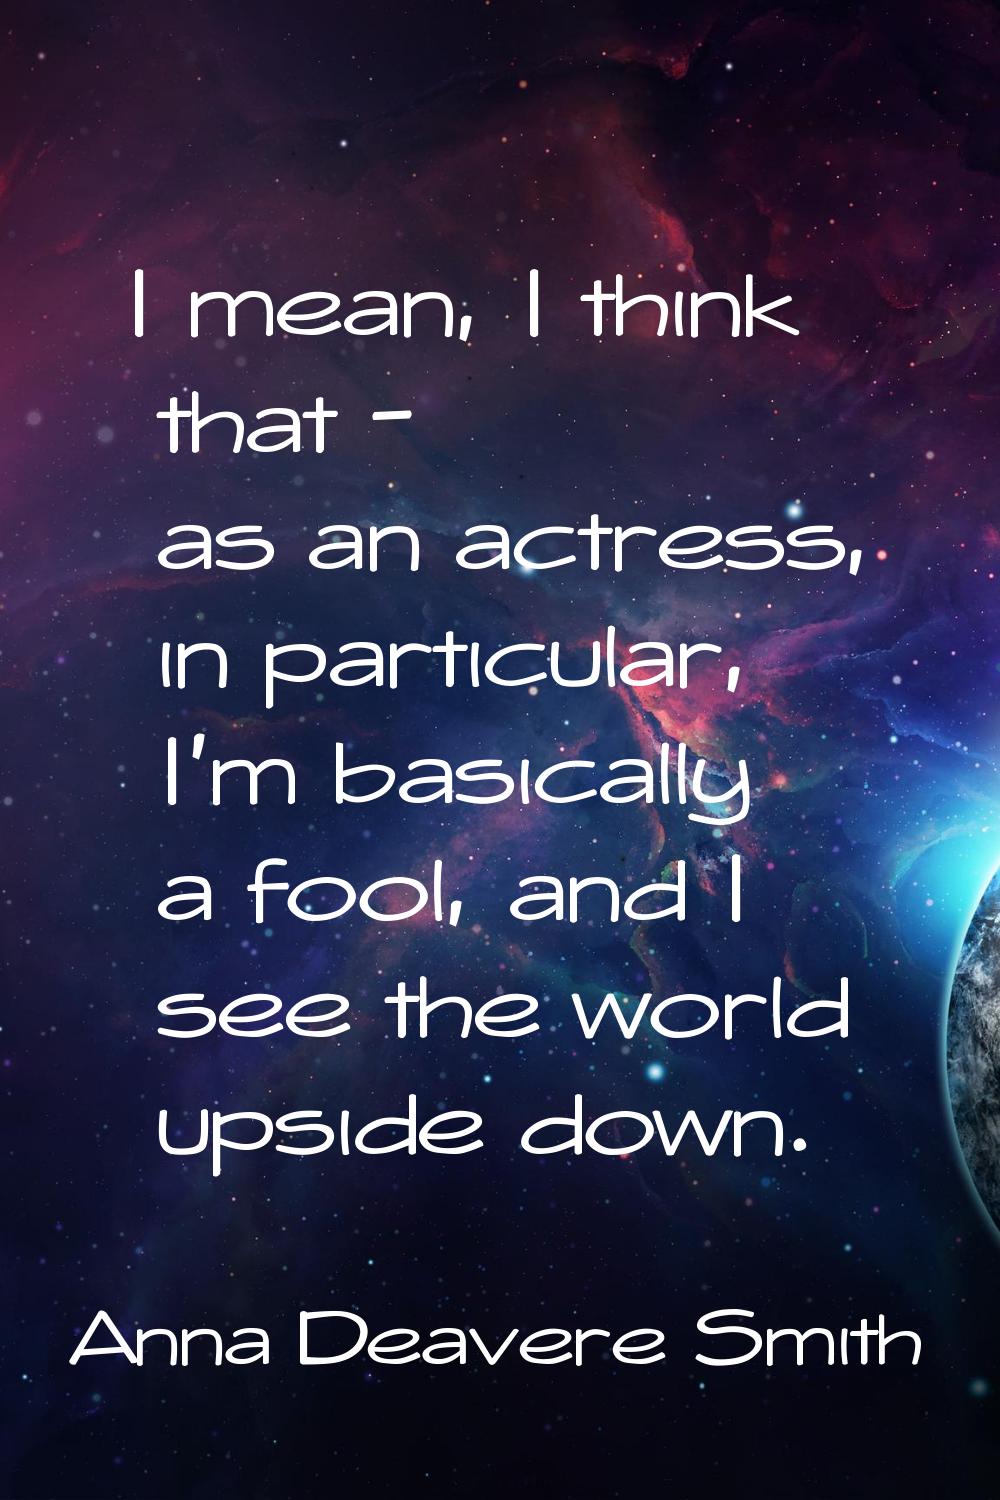 I mean, I think that - as an actress, in particular, I'm basically a fool, and I see the world upsi